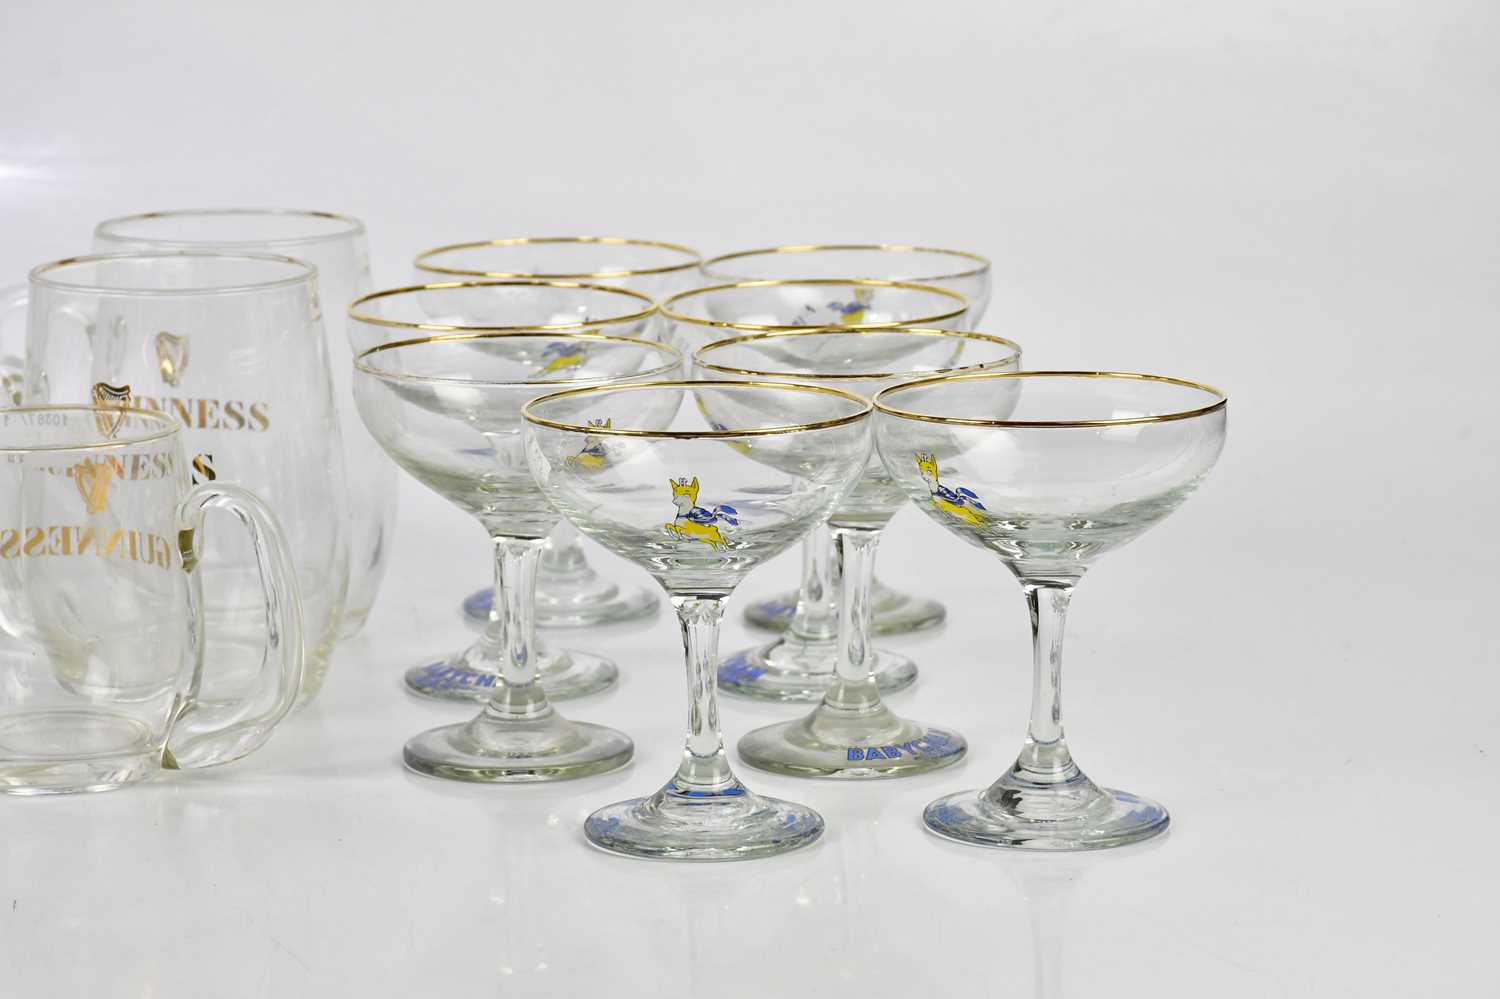 A collection of eight Babycham glasses, five Cherry B glasses and five Guinness glasses. - Image 4 of 4